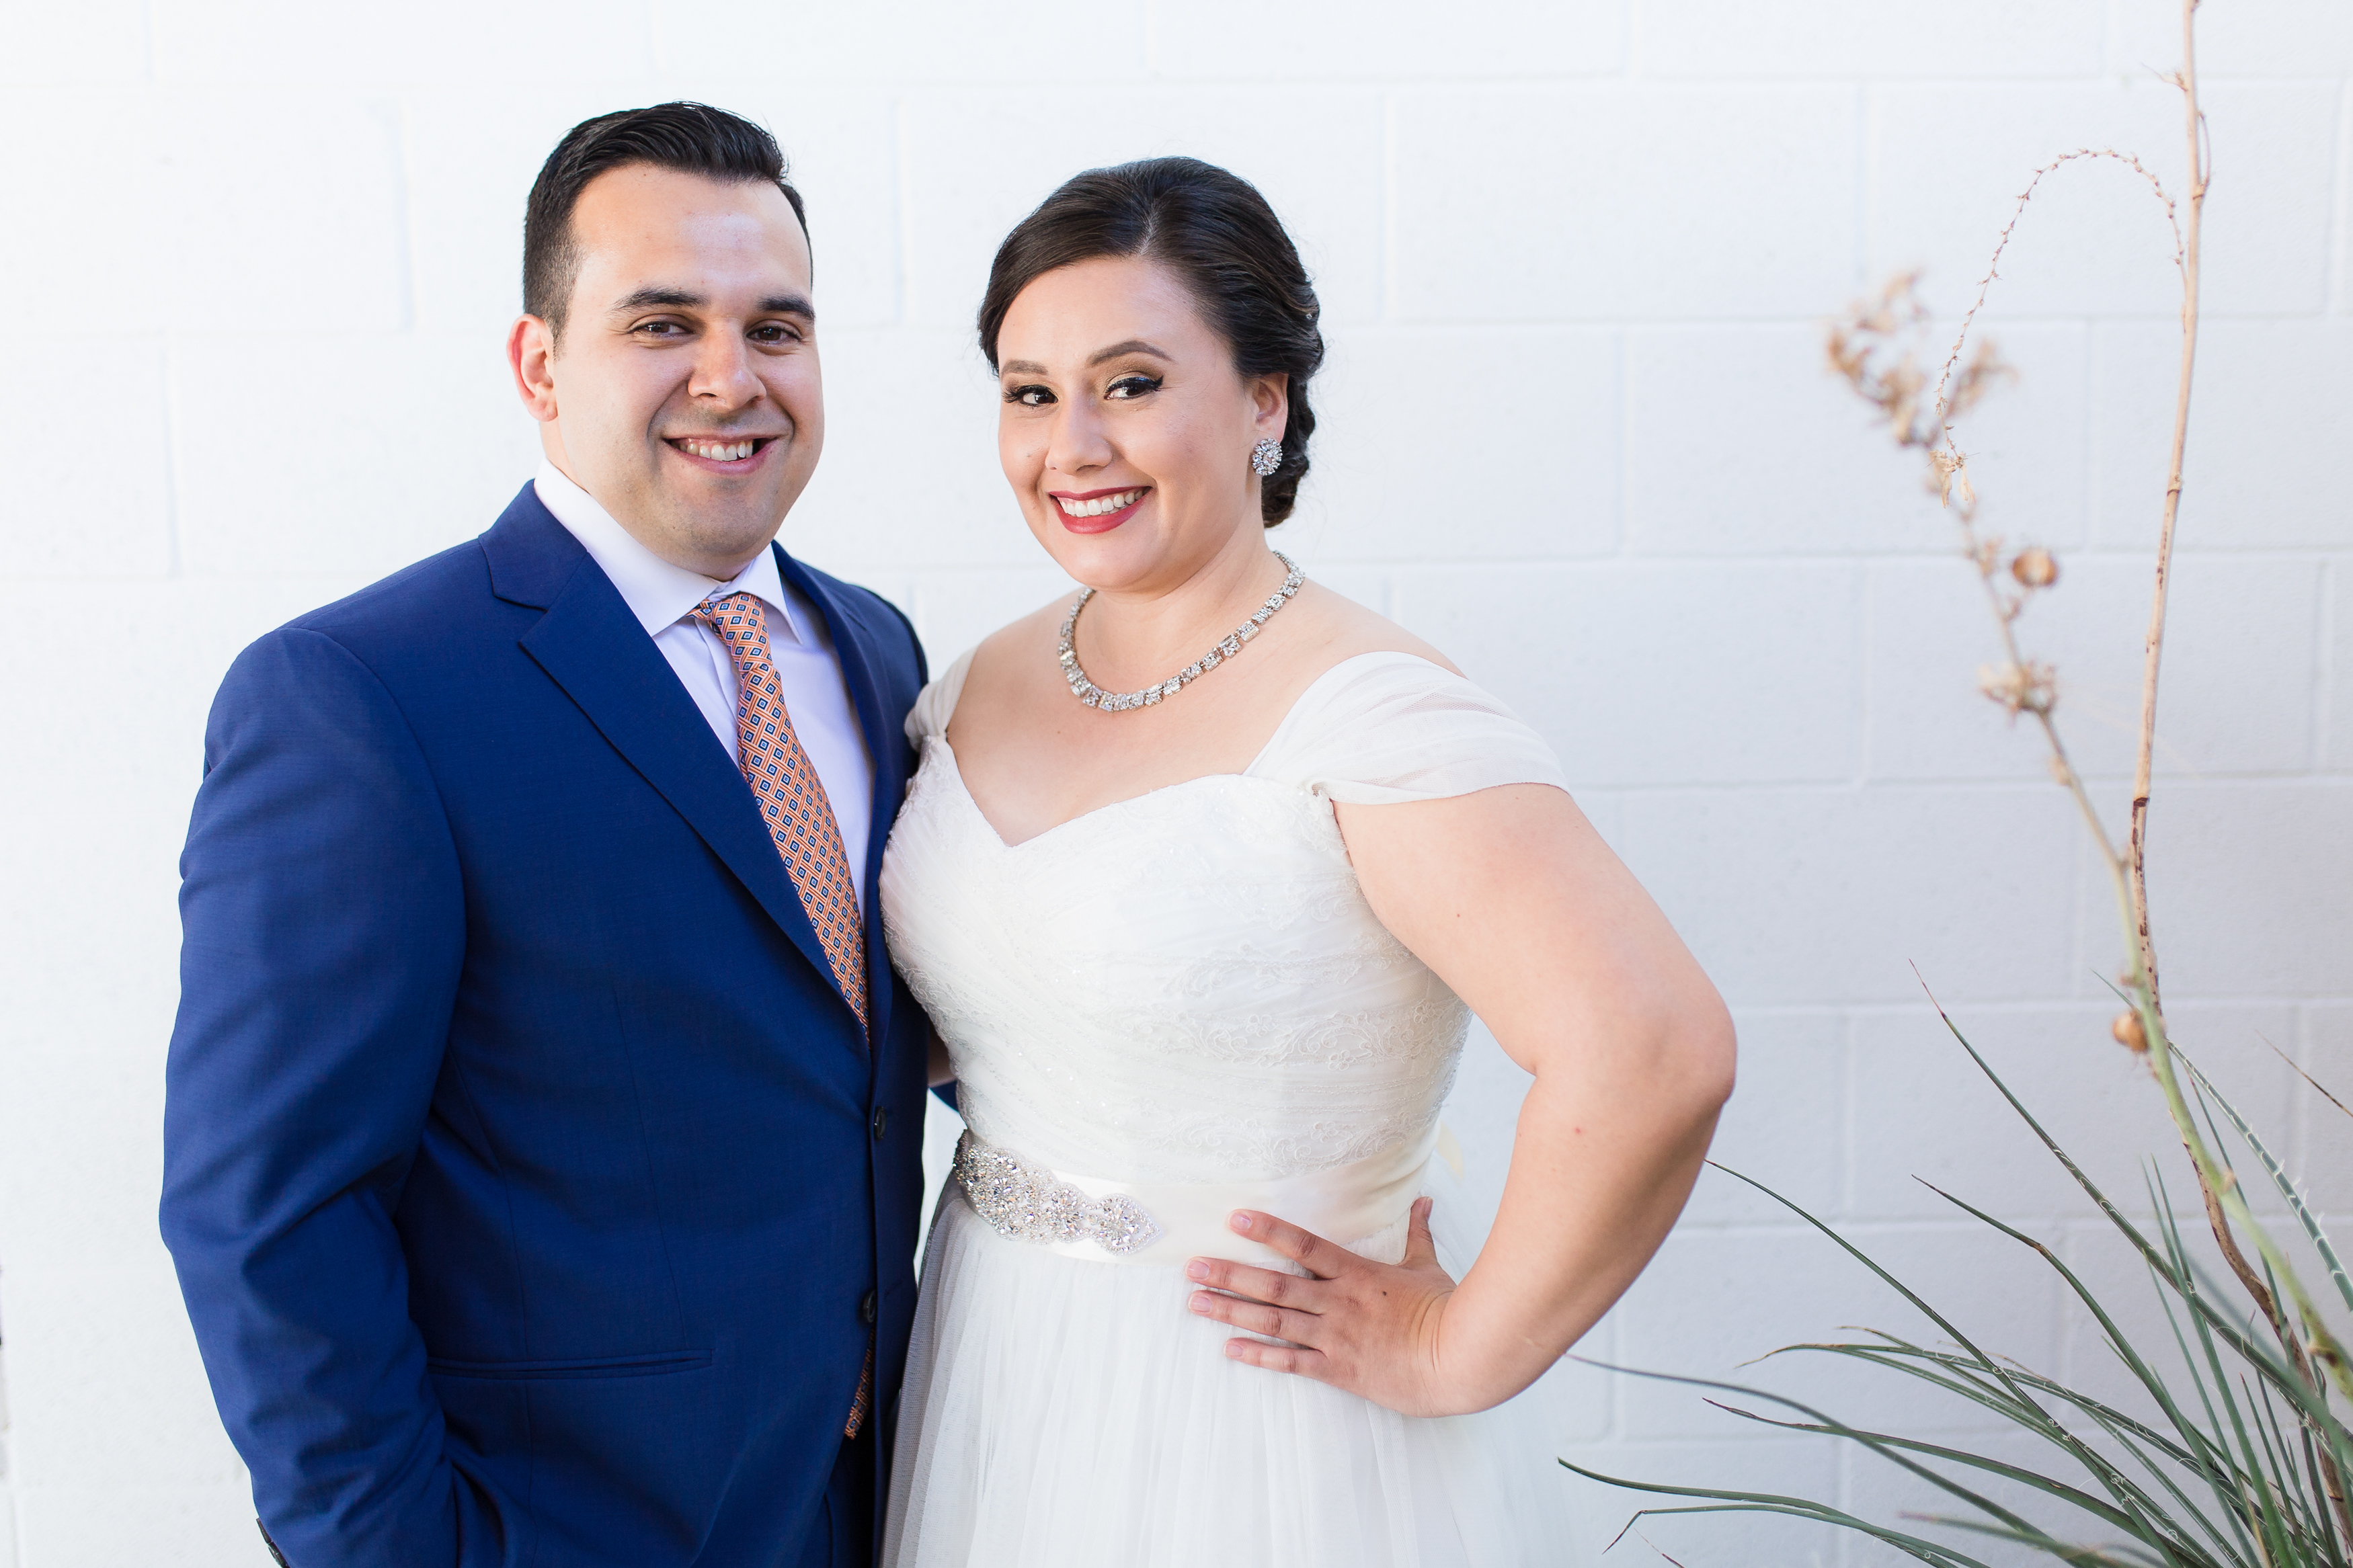 Wedding couple smiling at camera against plain white wall